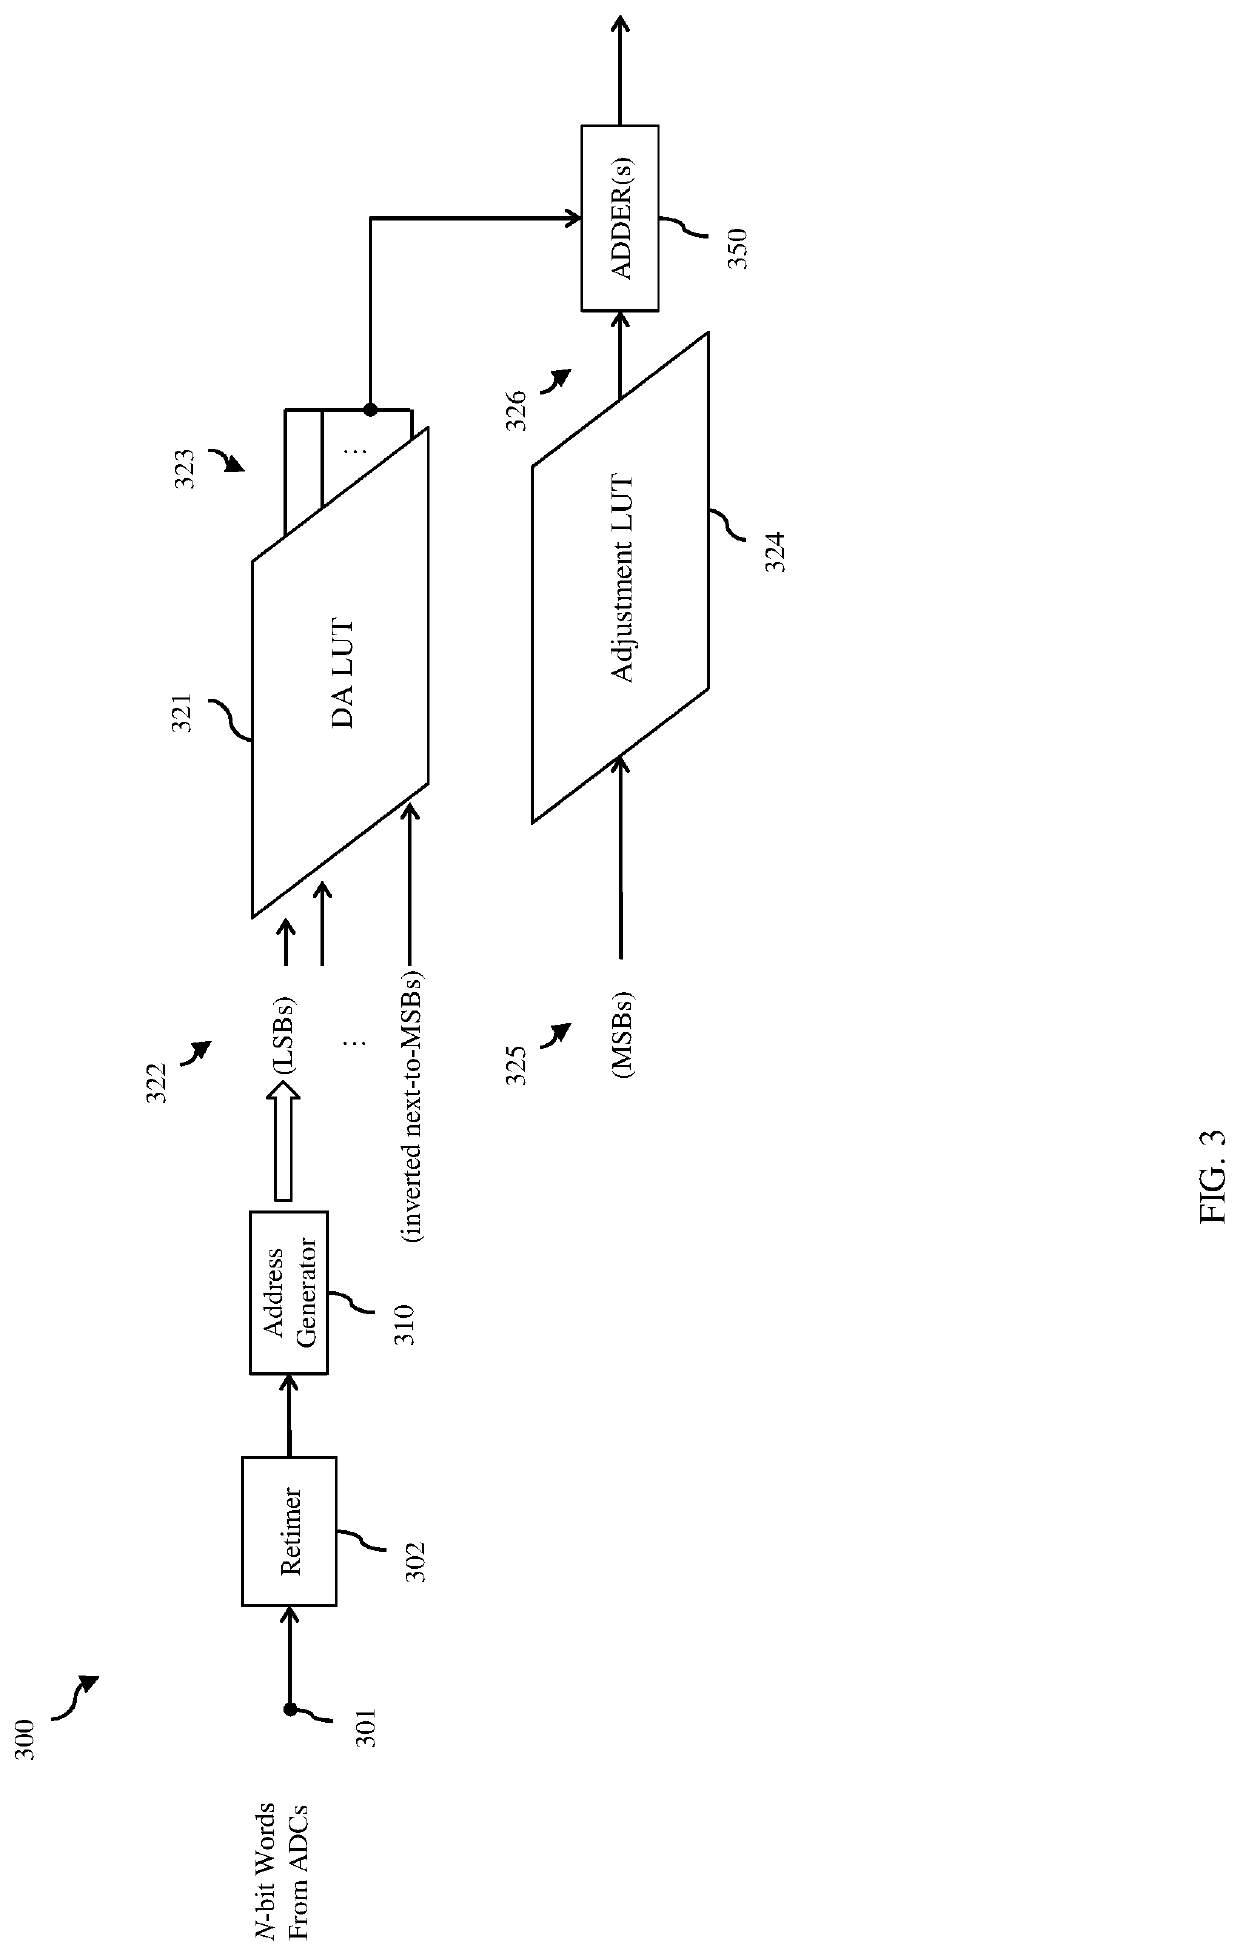 Feed forward equalizer with power-optimized distributed arithmetic architecture and method